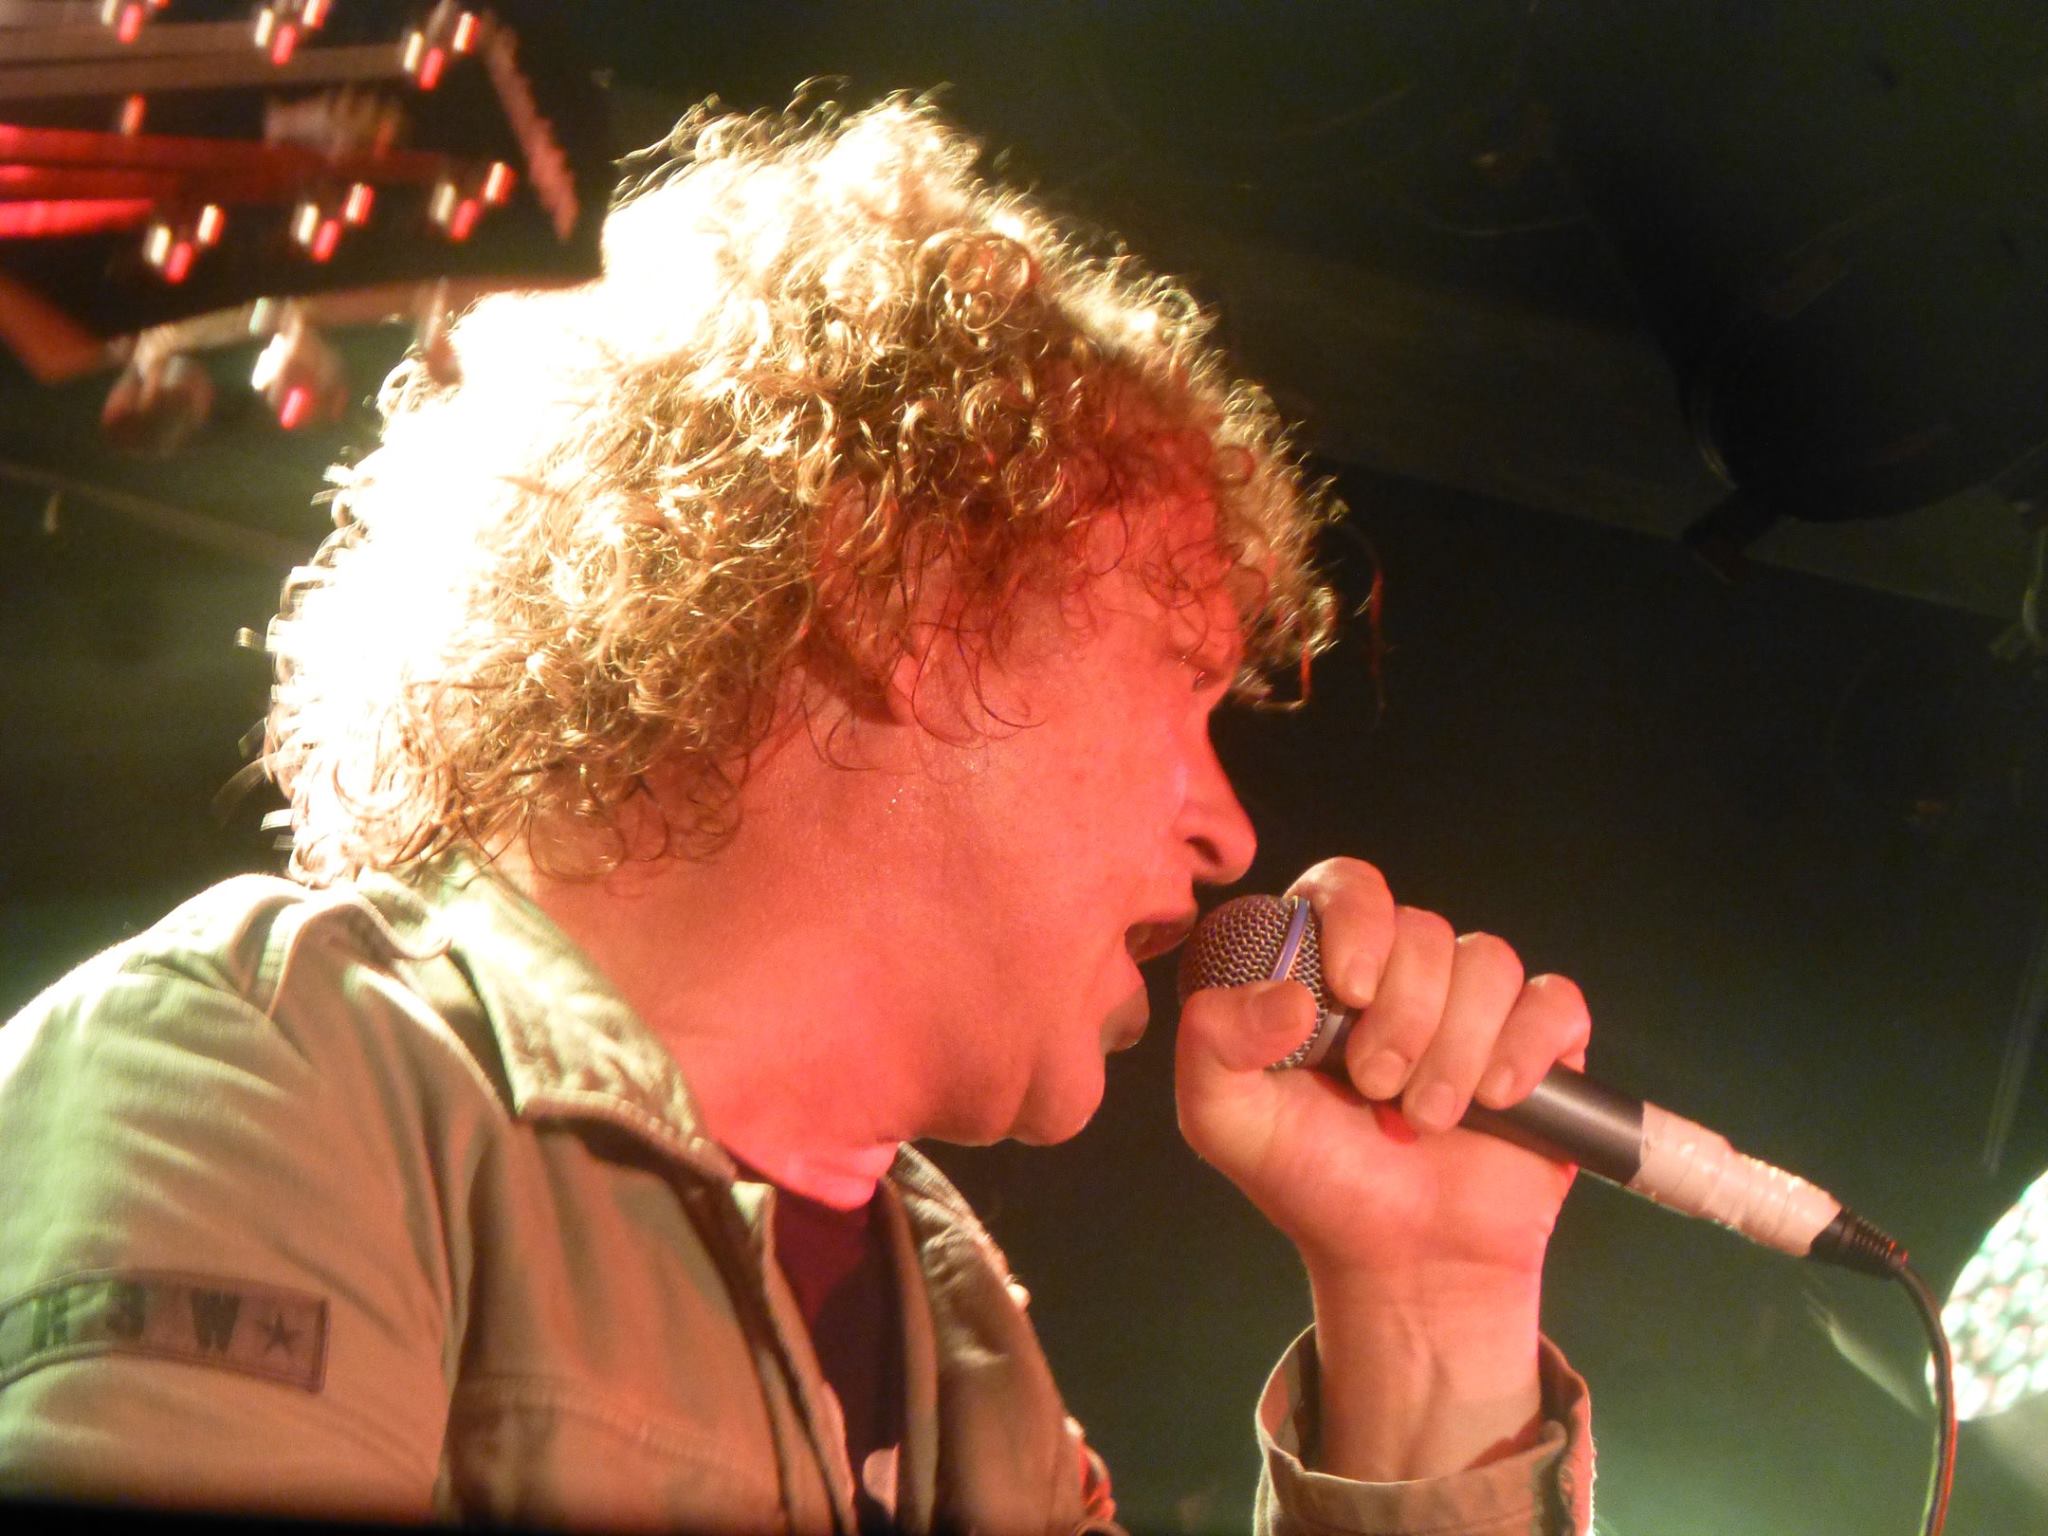 Archive – Gig review: Screaming Jets at Factory Theatre, Sydney (2014)